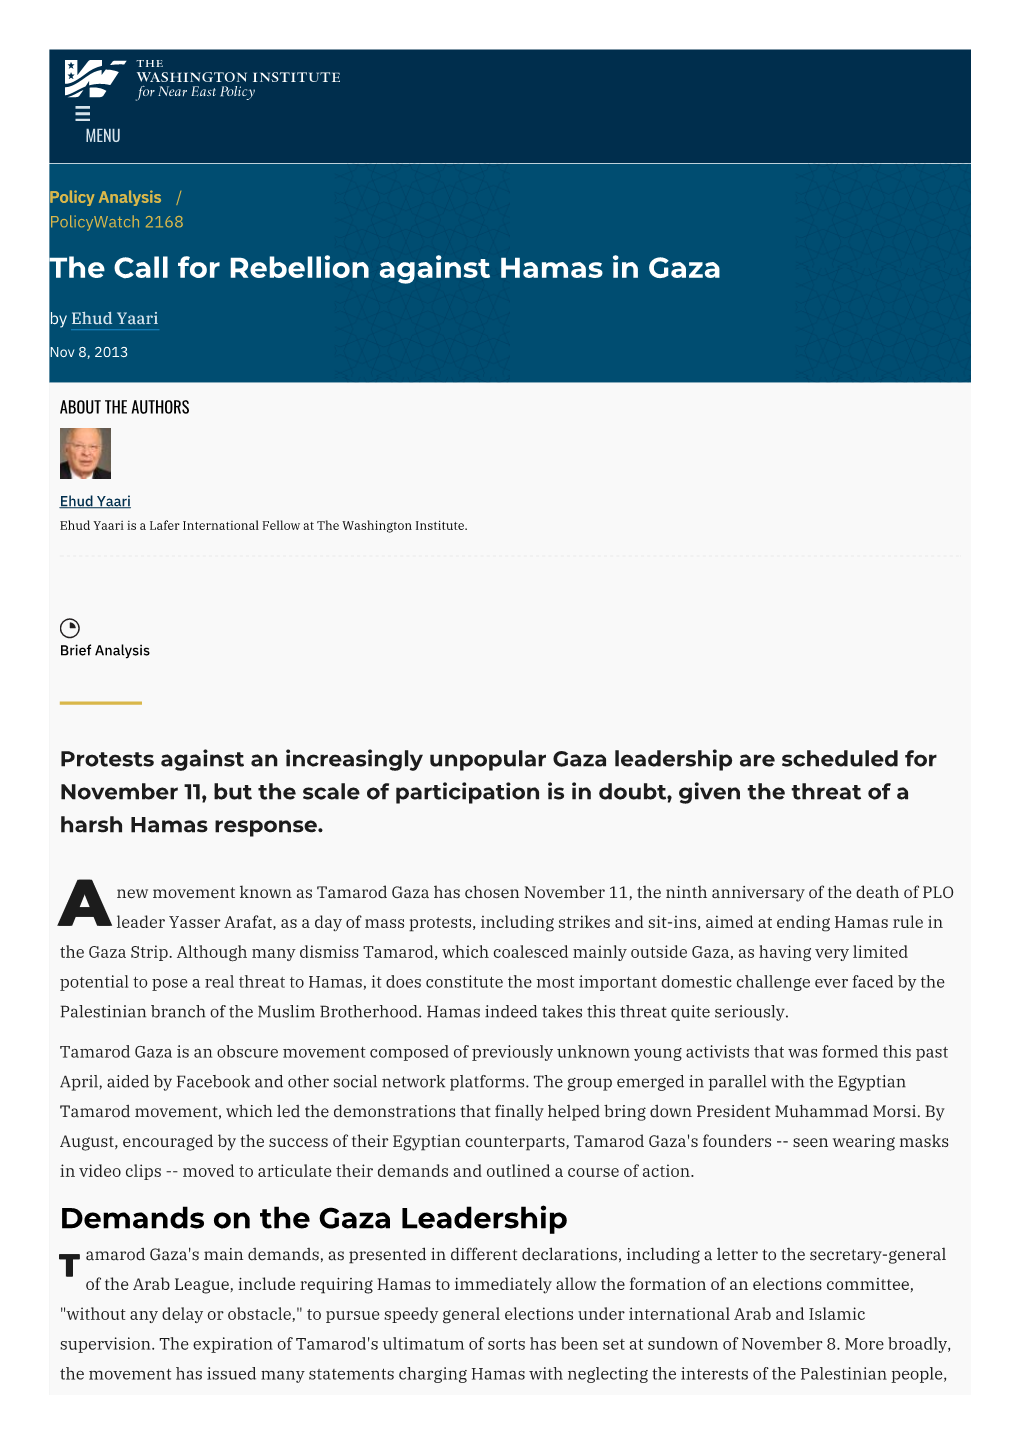 The Call for Rebellion Against Hamas in Gaza | the Washington Institute